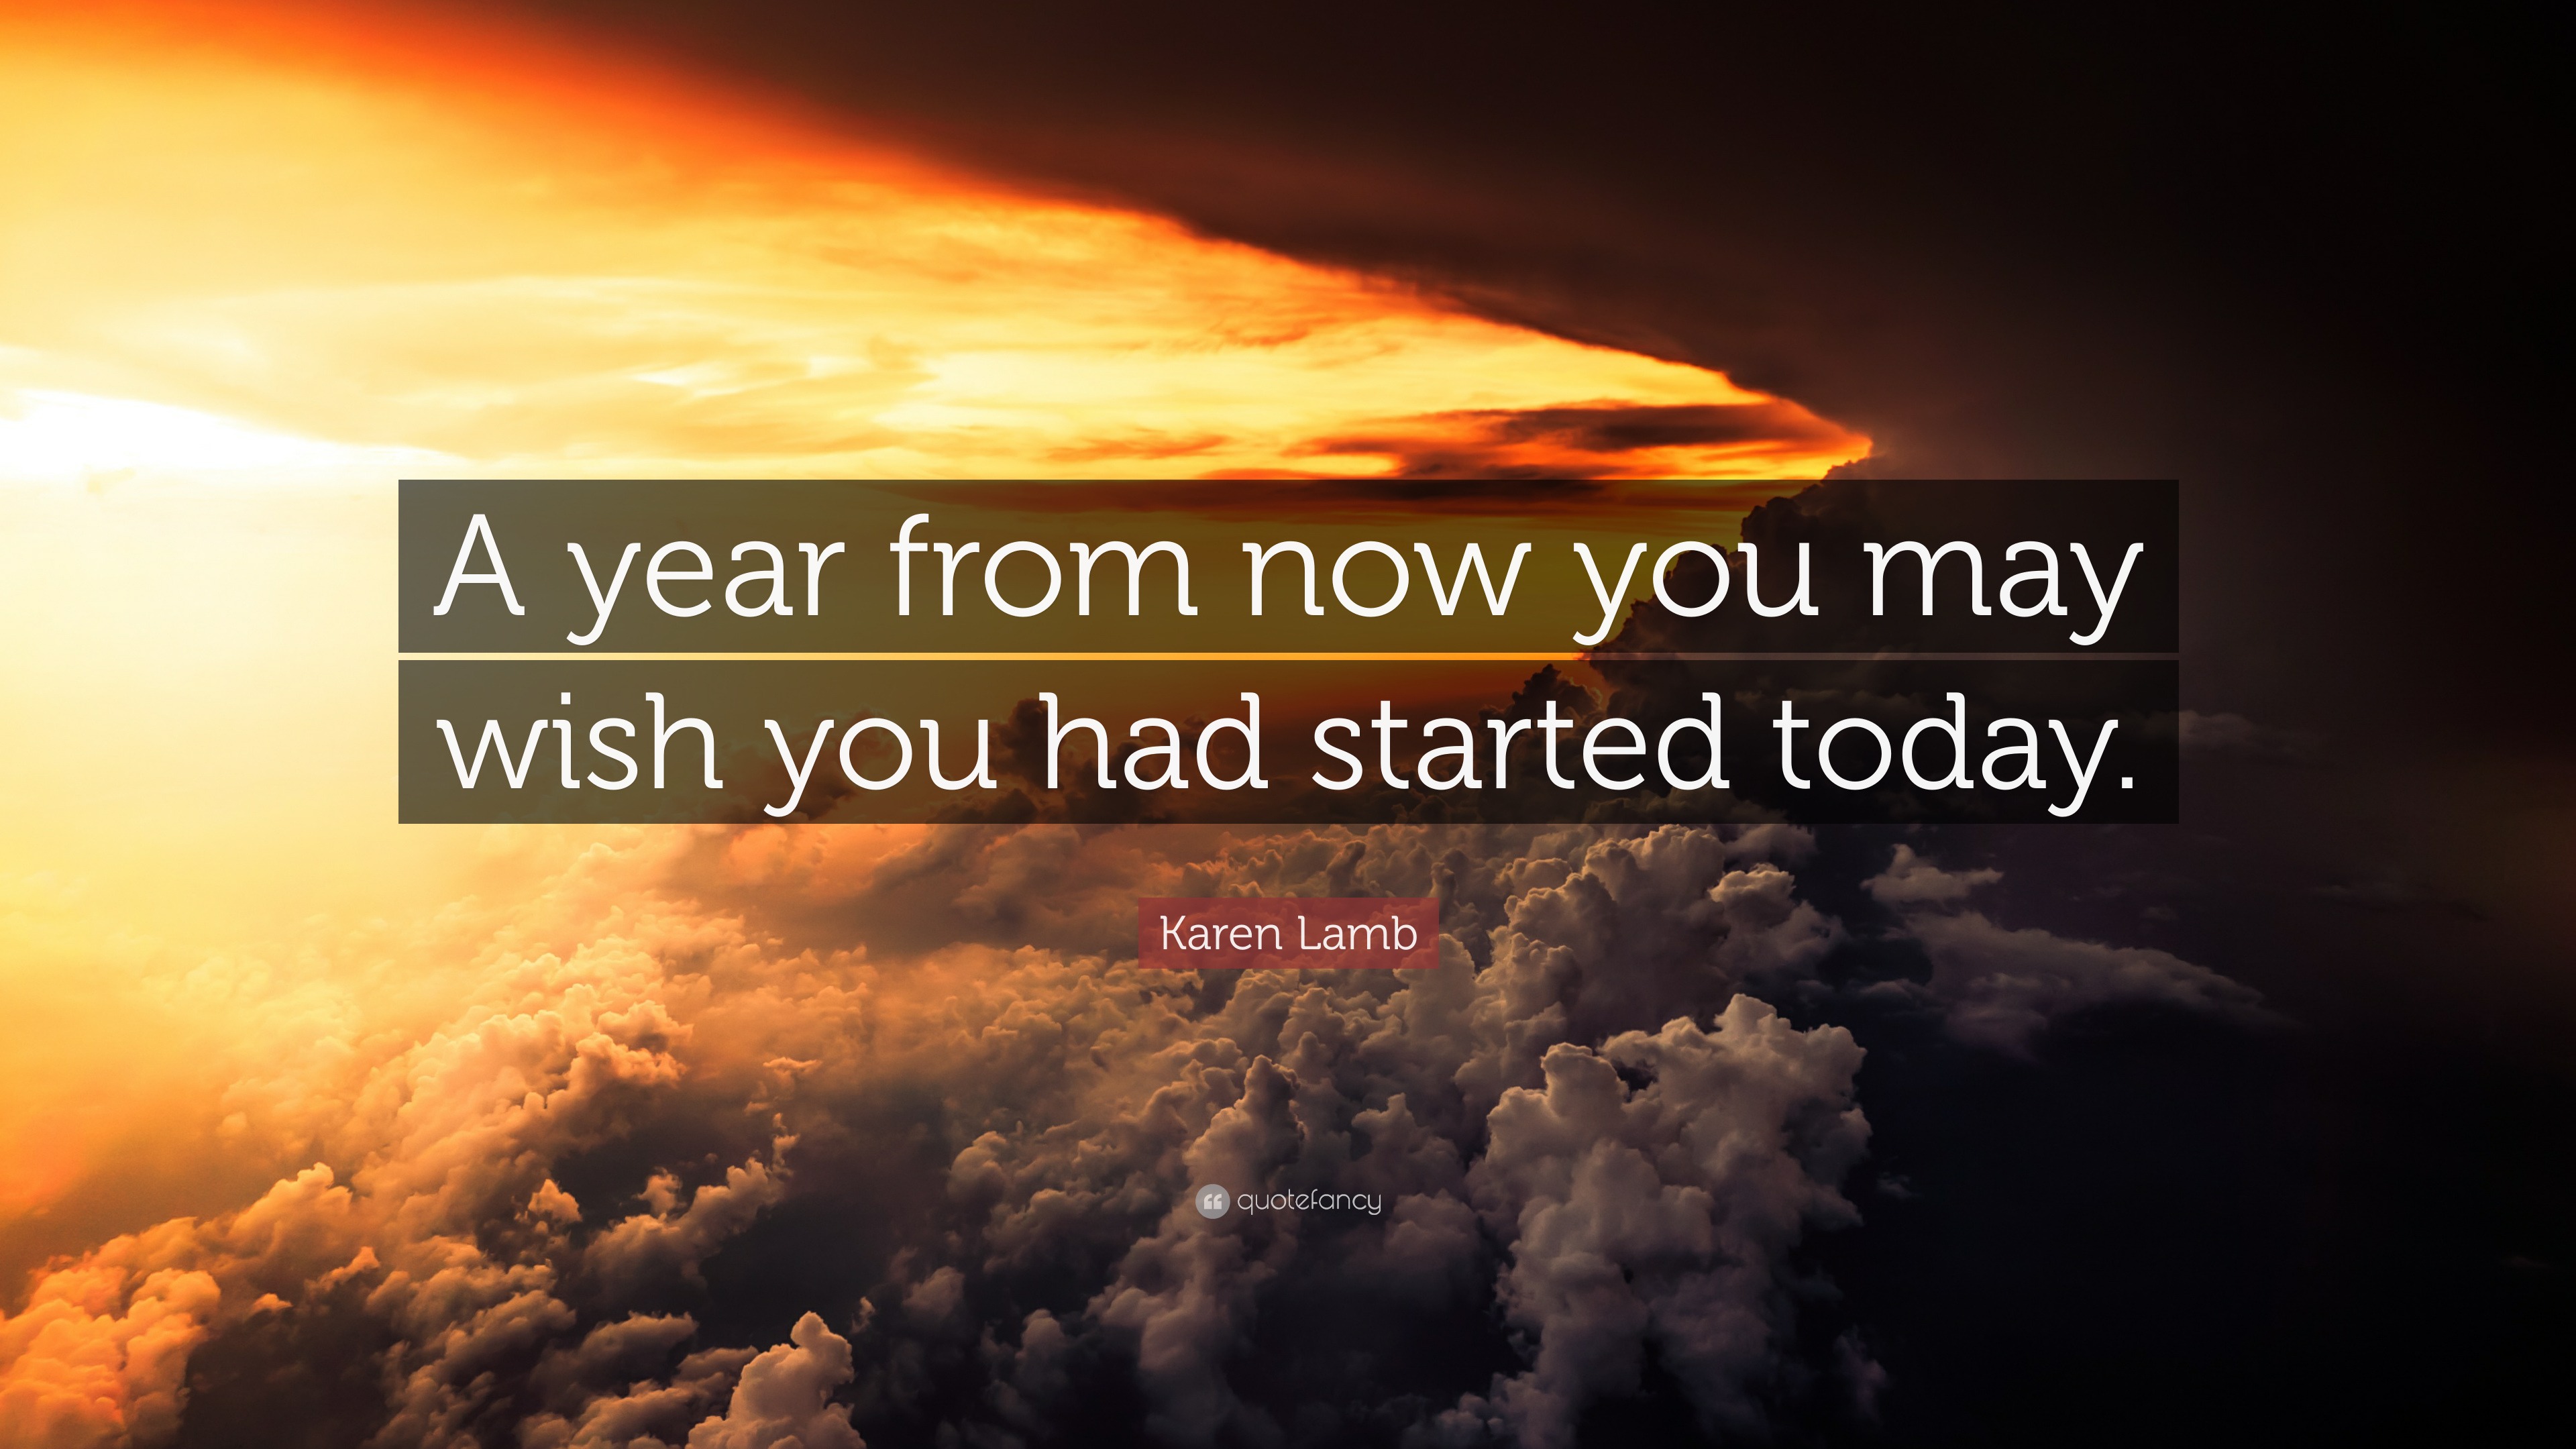 2002377 Karen Lamb Quote A year from now you may wish you had started